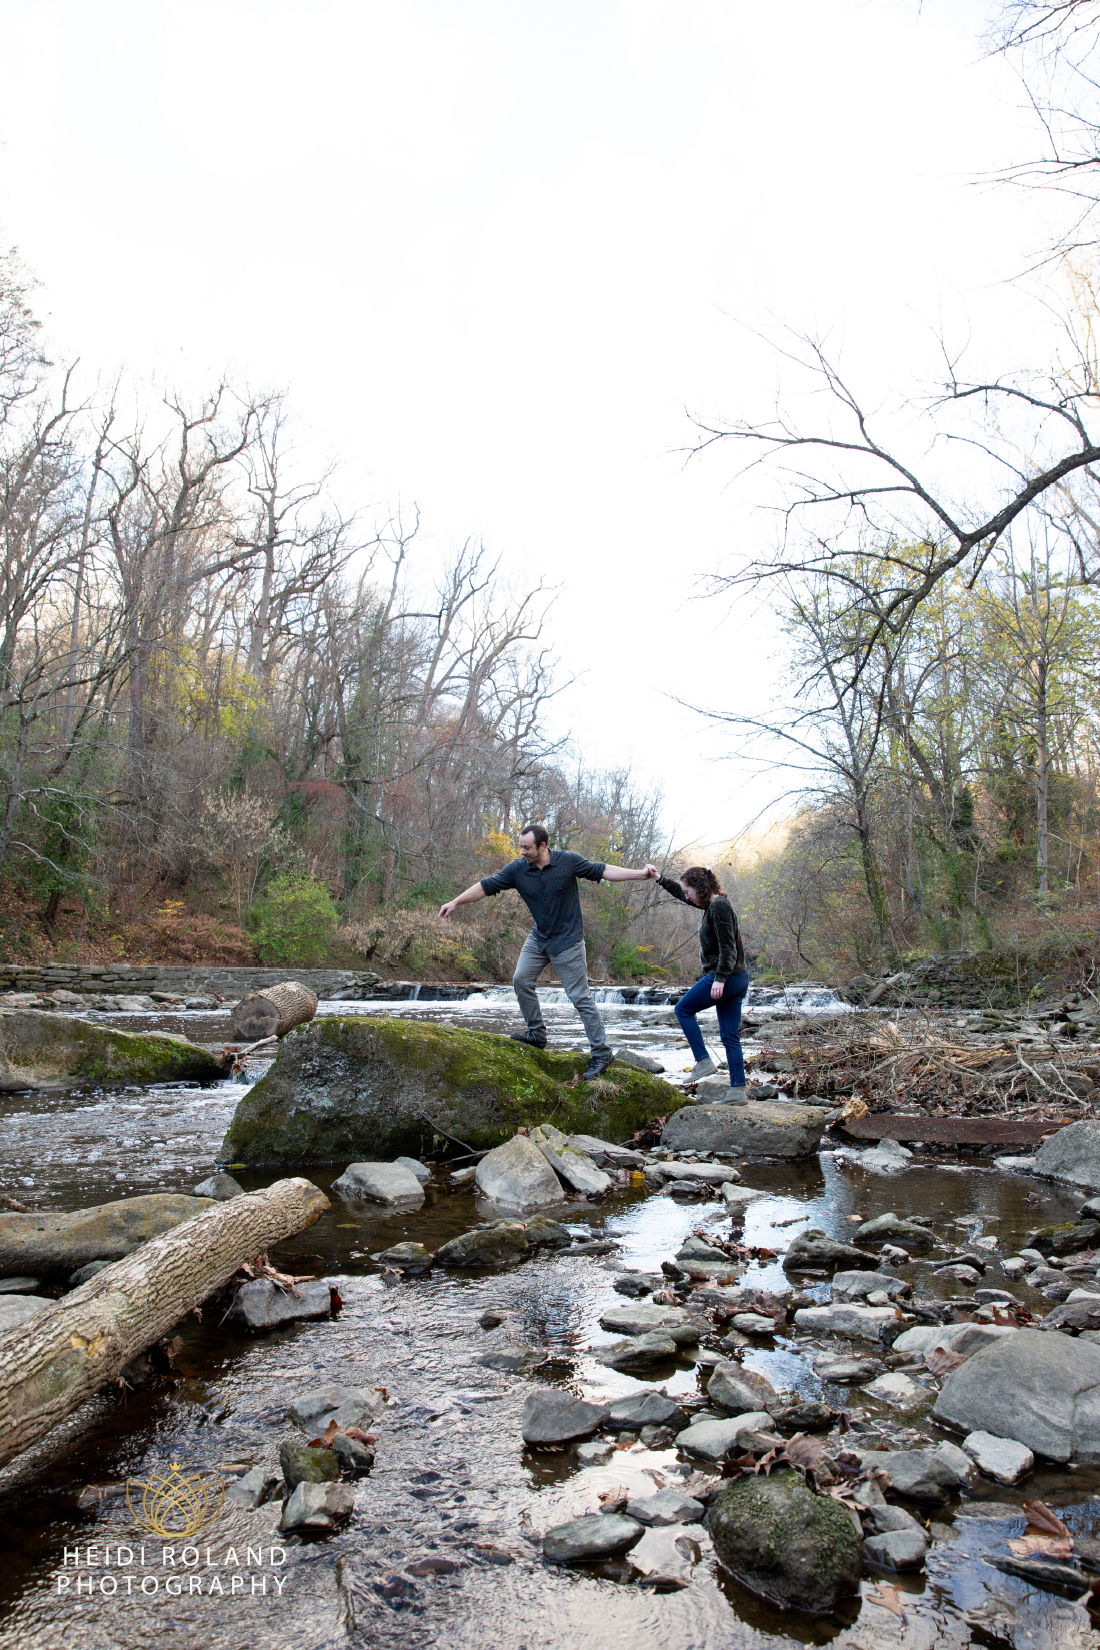 Couple walking across rocks in a river at Wissahickon Valley Park in Philadelphia